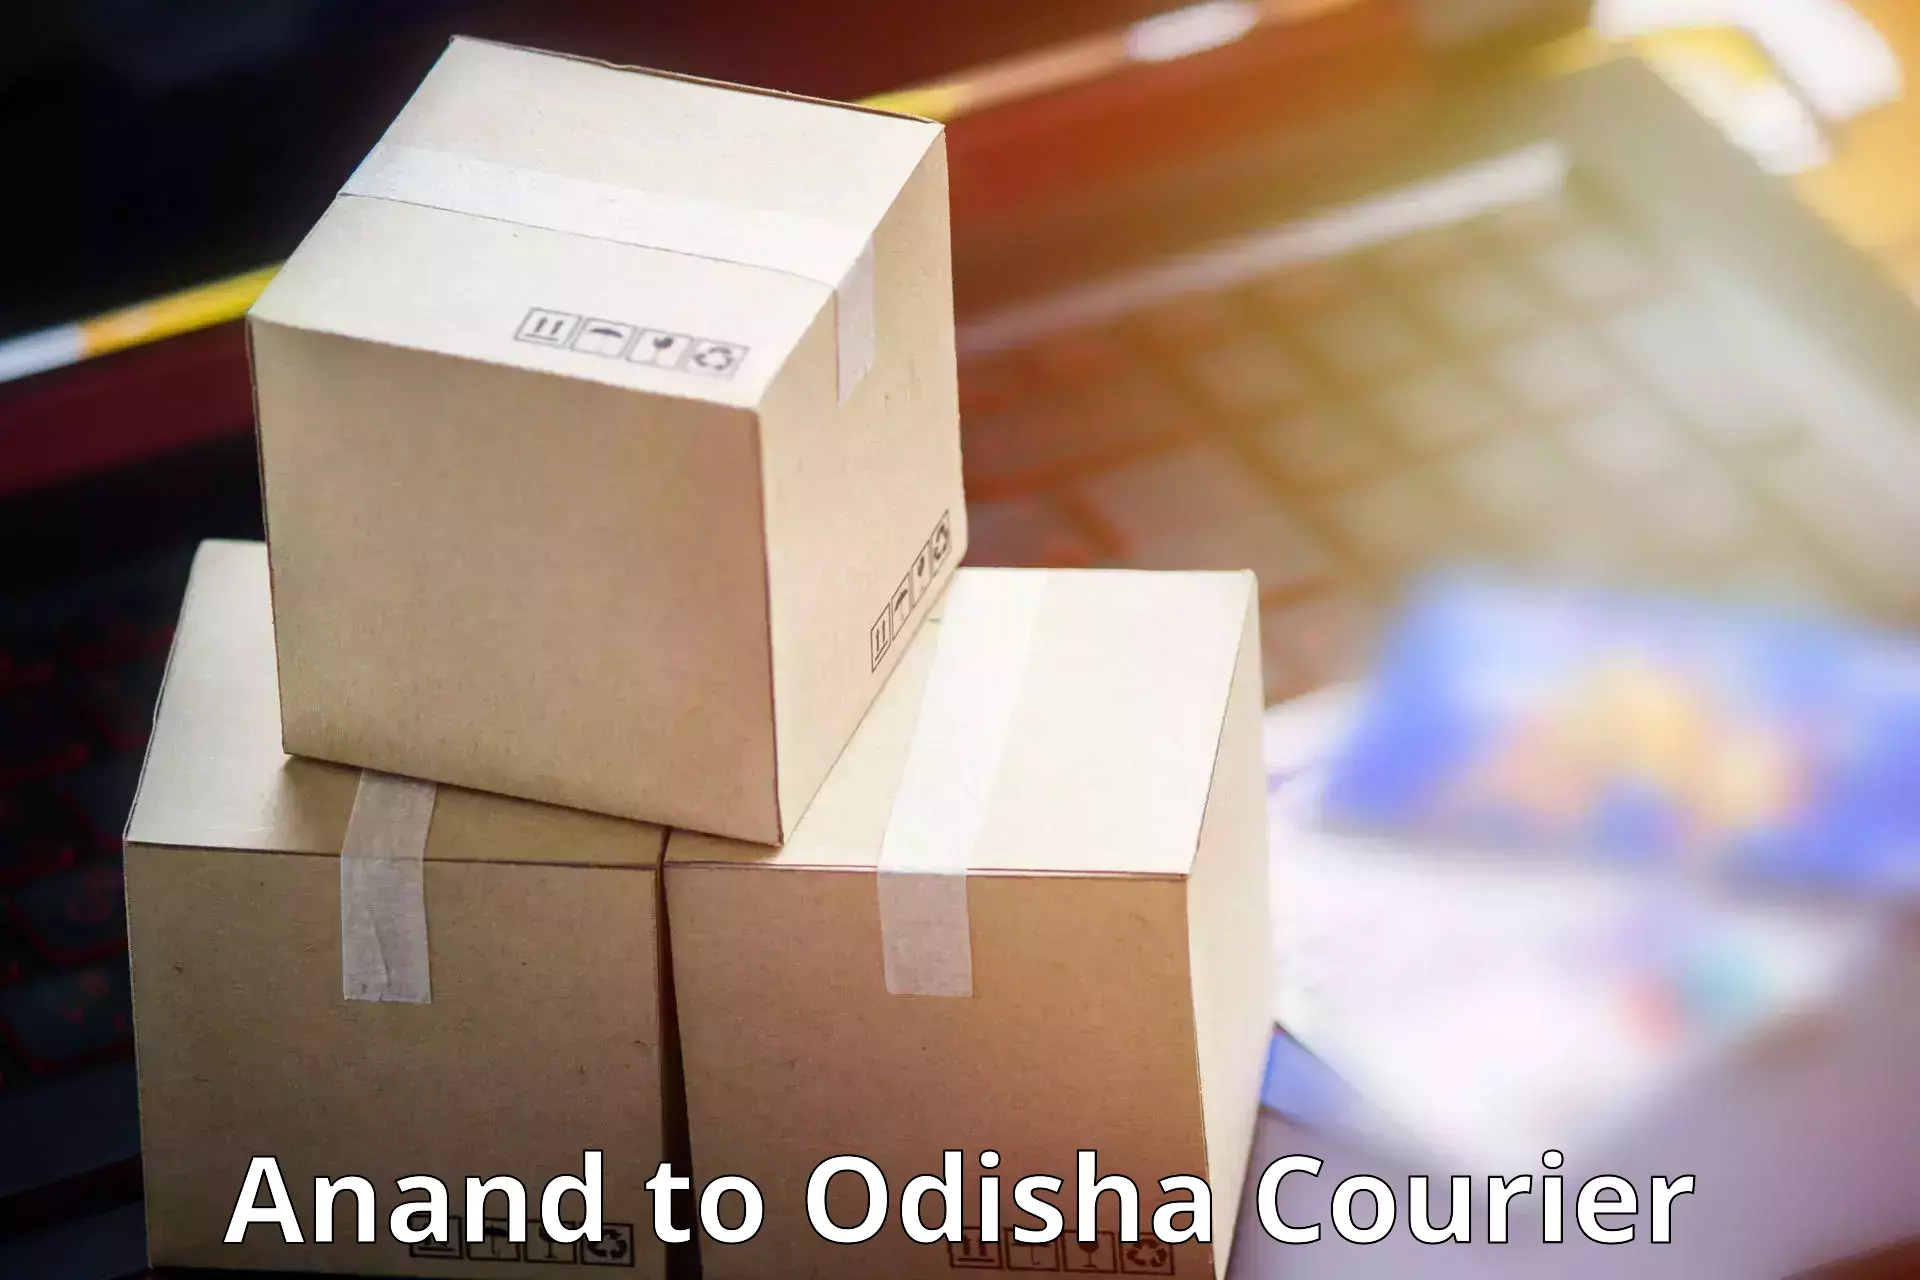 Multi-service courier options Anand to Udala